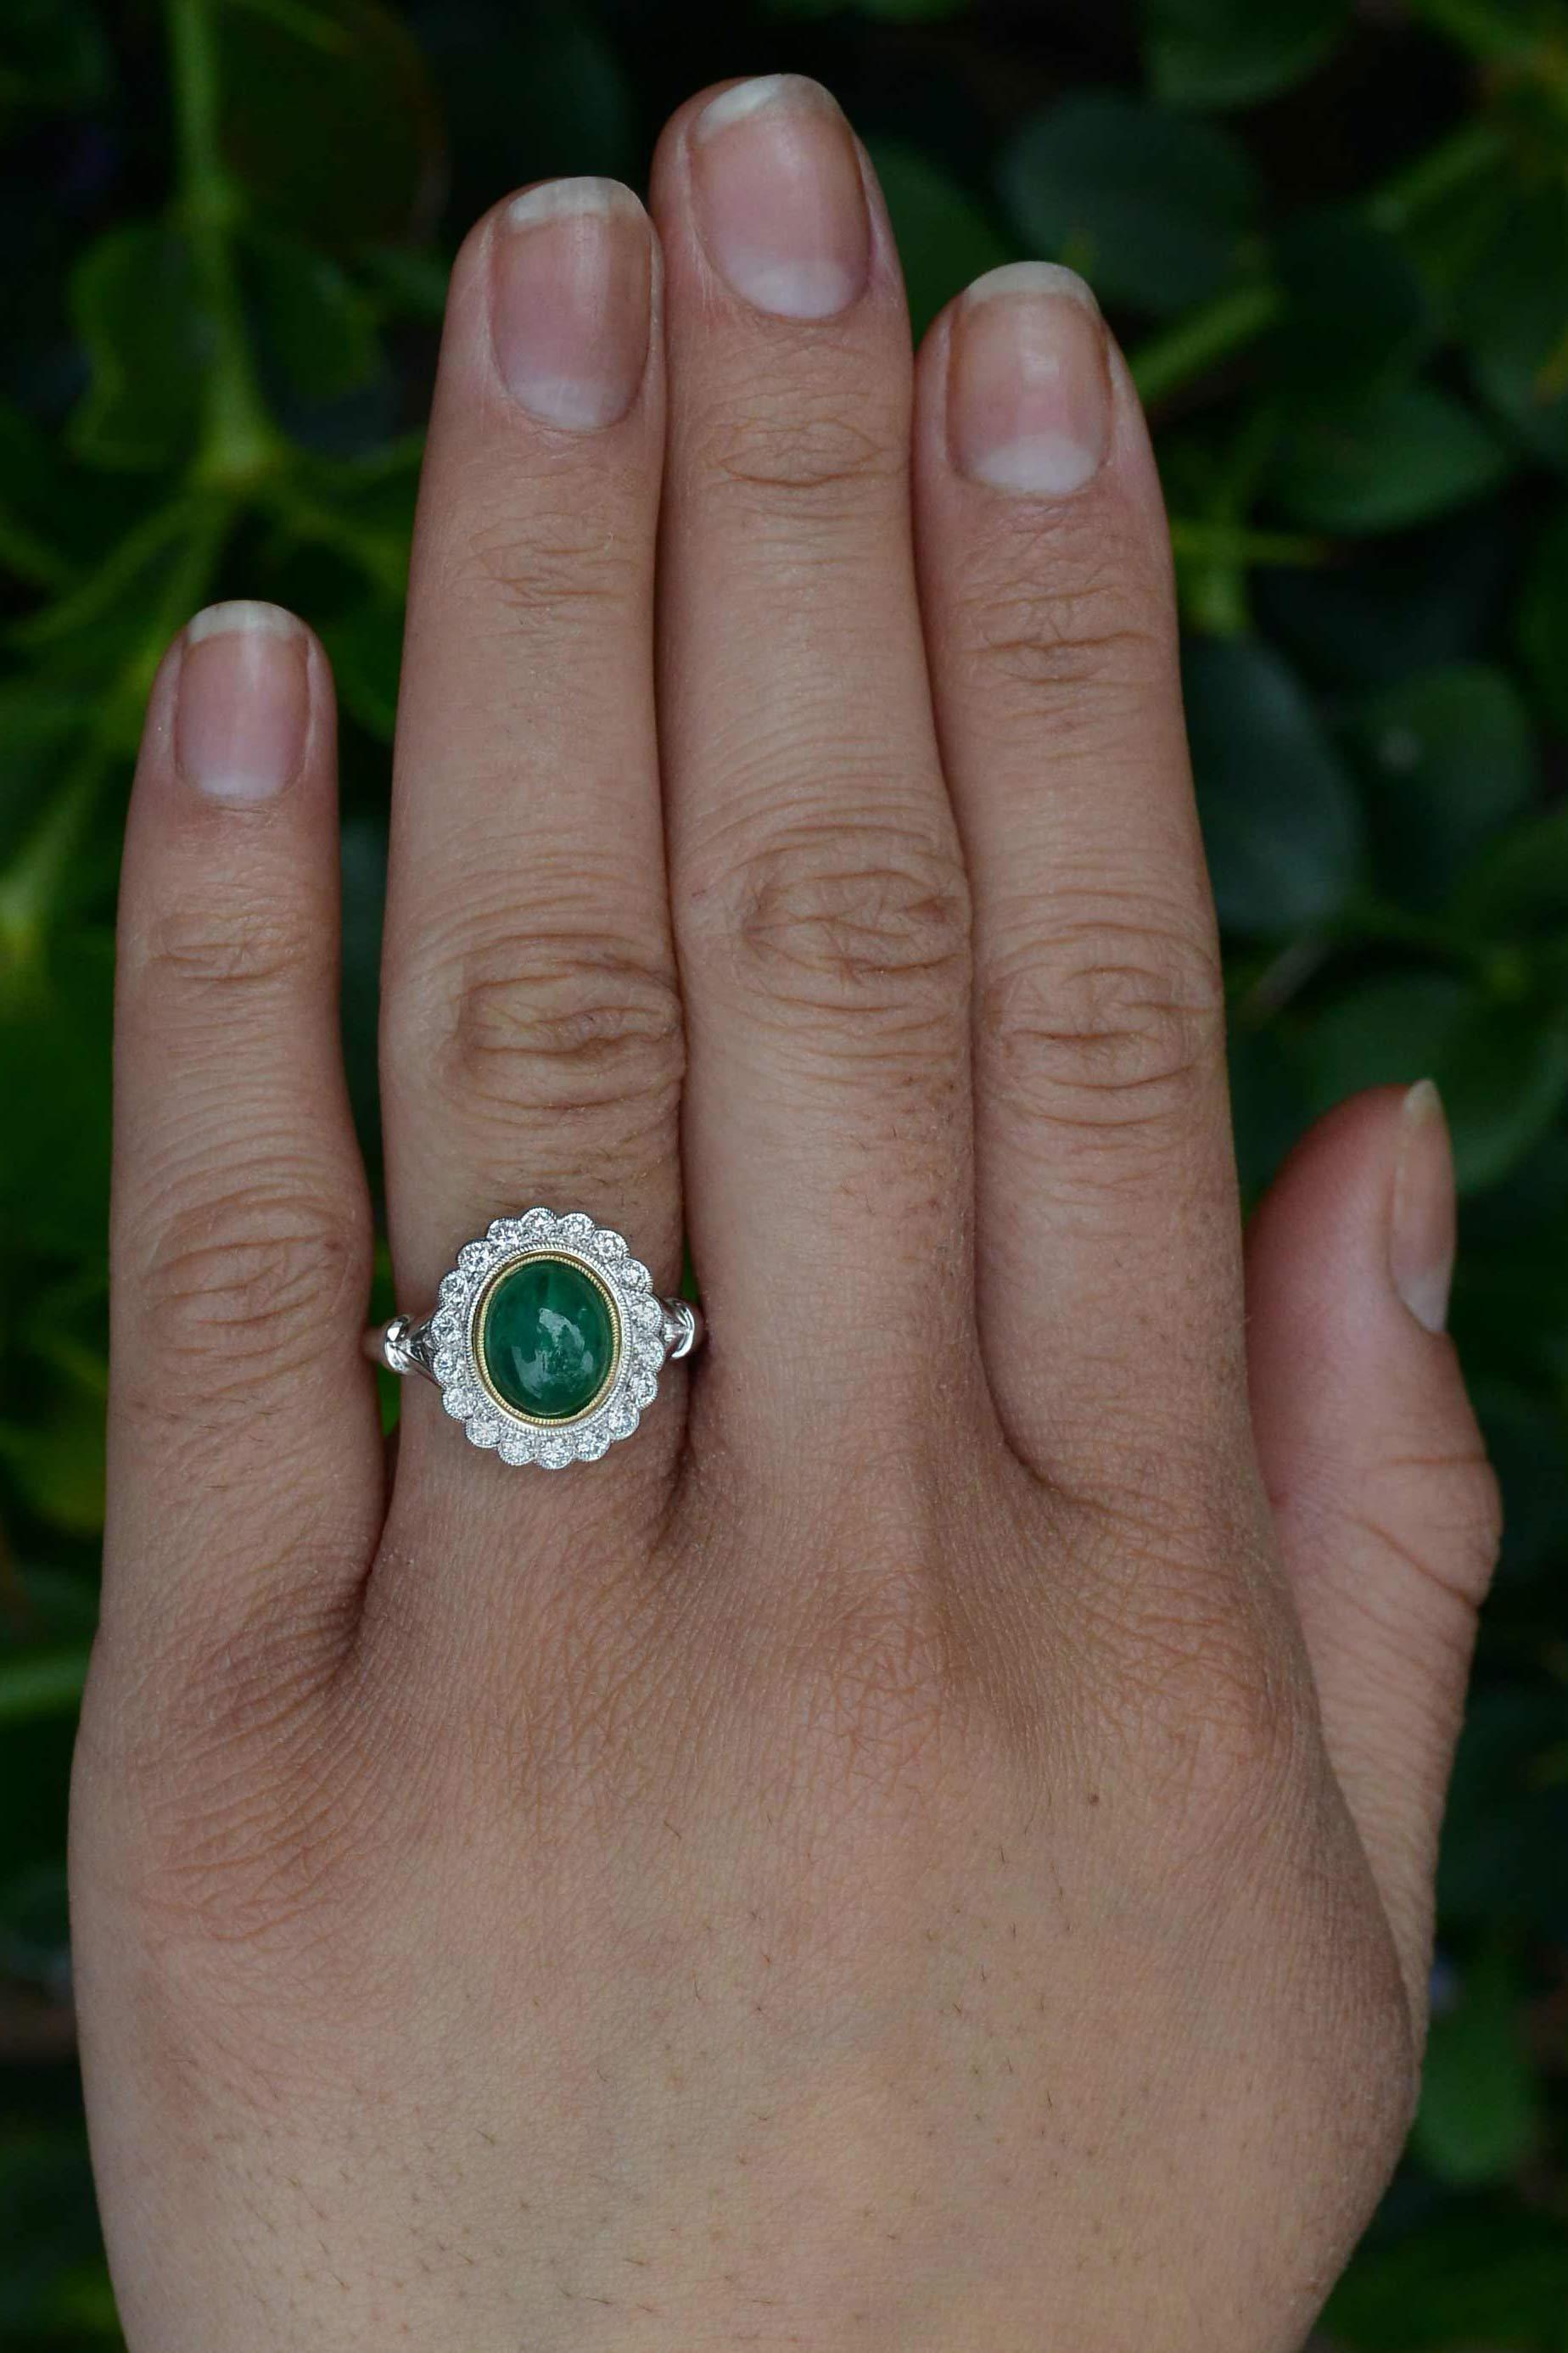 A classic emerald engagement ring. Centered by a glowing oval cabochon near 2 carat emerald with a lush, vibrant, medium-dark green, complimented by a yellow gold bezel. The scalloped and milgrained 1/2 Ct. diamond halo adds a sparkling, fiery